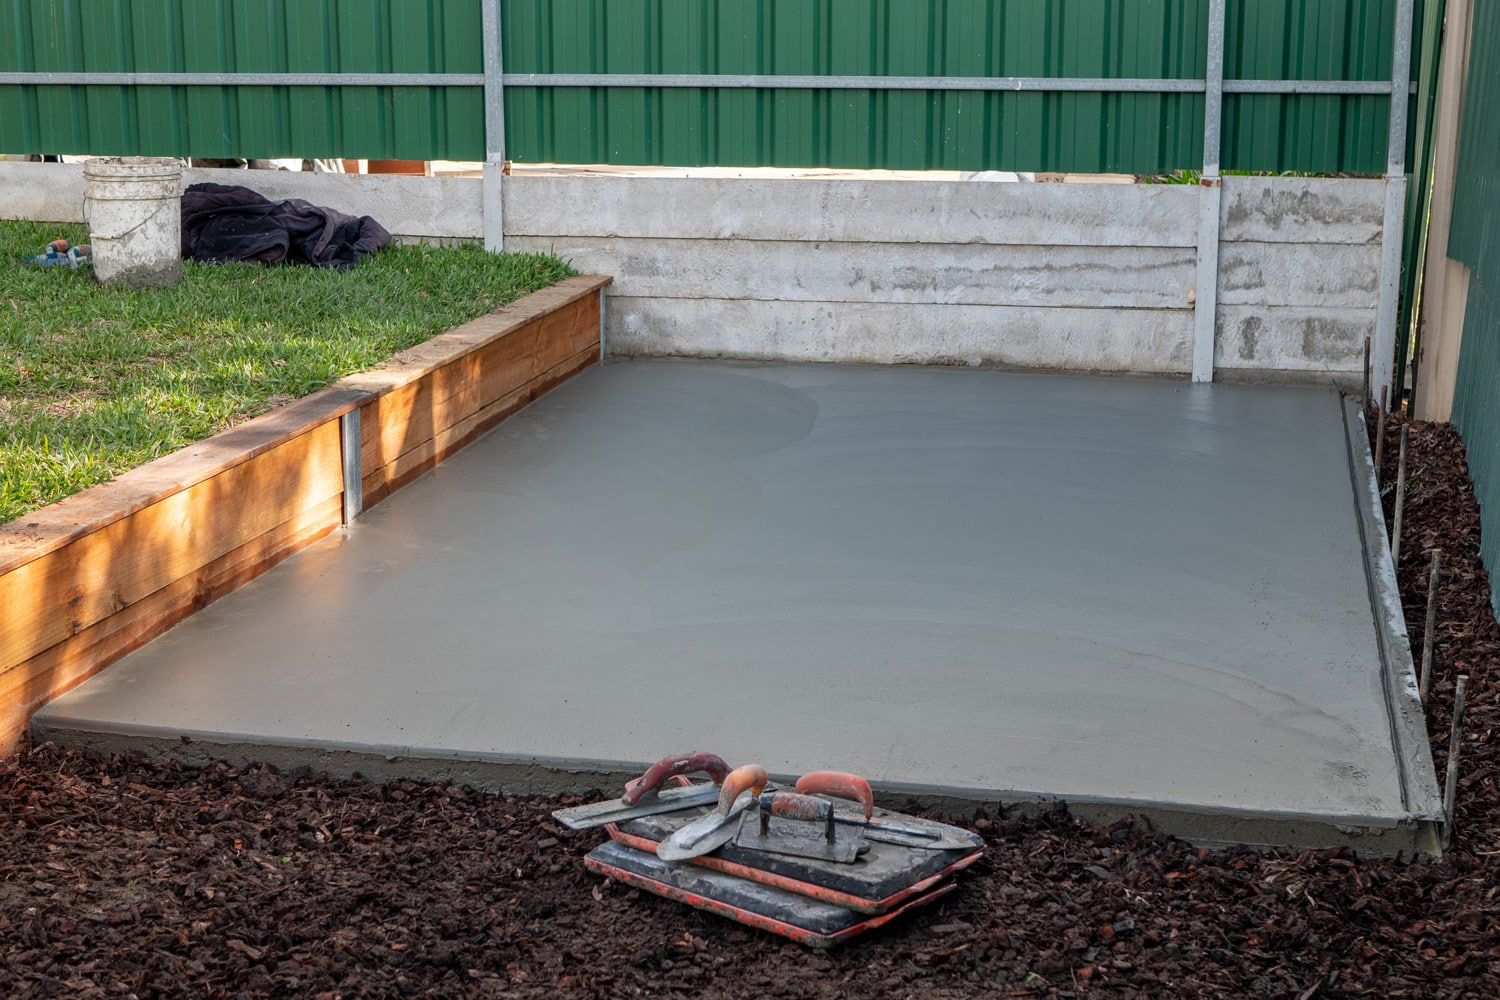 Pouring concrete slab for shed foundation in backyard